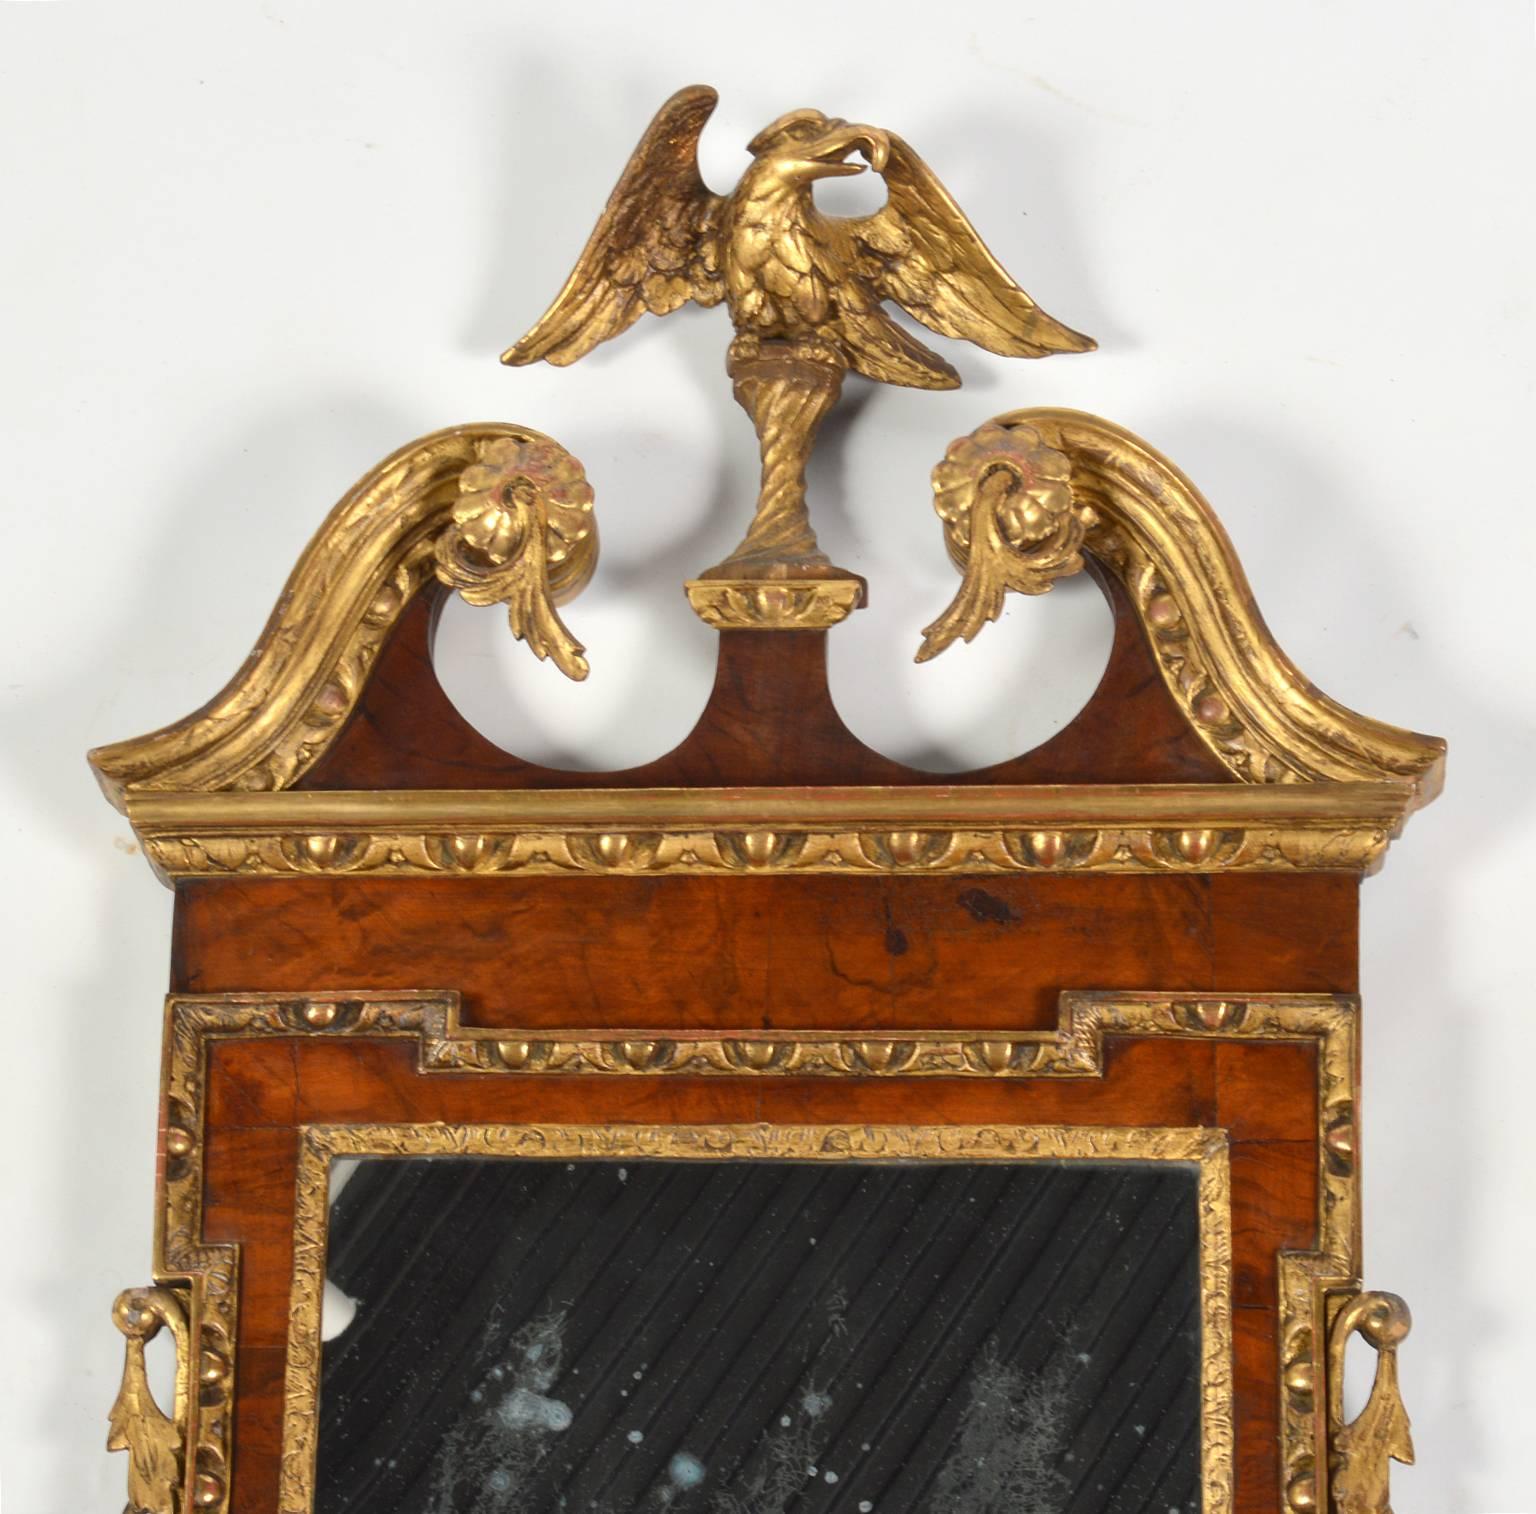 Georgian 18th Century English Carved Giltwood and Parquetry Eagle Crested Wall Mirror